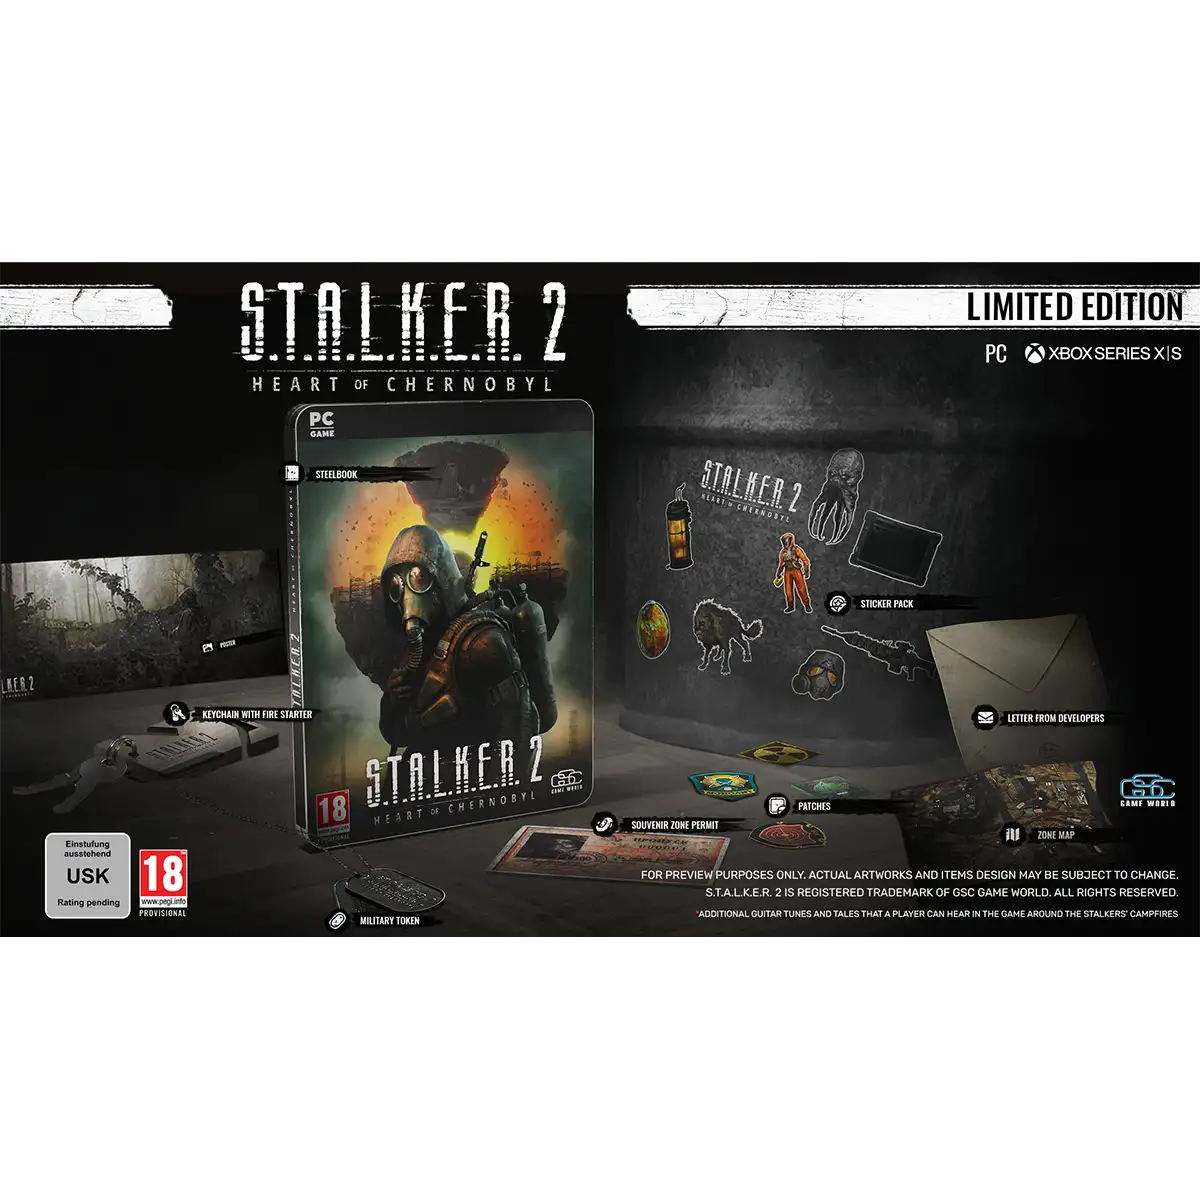 S.T.A.L.K.E.R. 2: Heart of Chornobyl Limited Edition (PC) Image 2